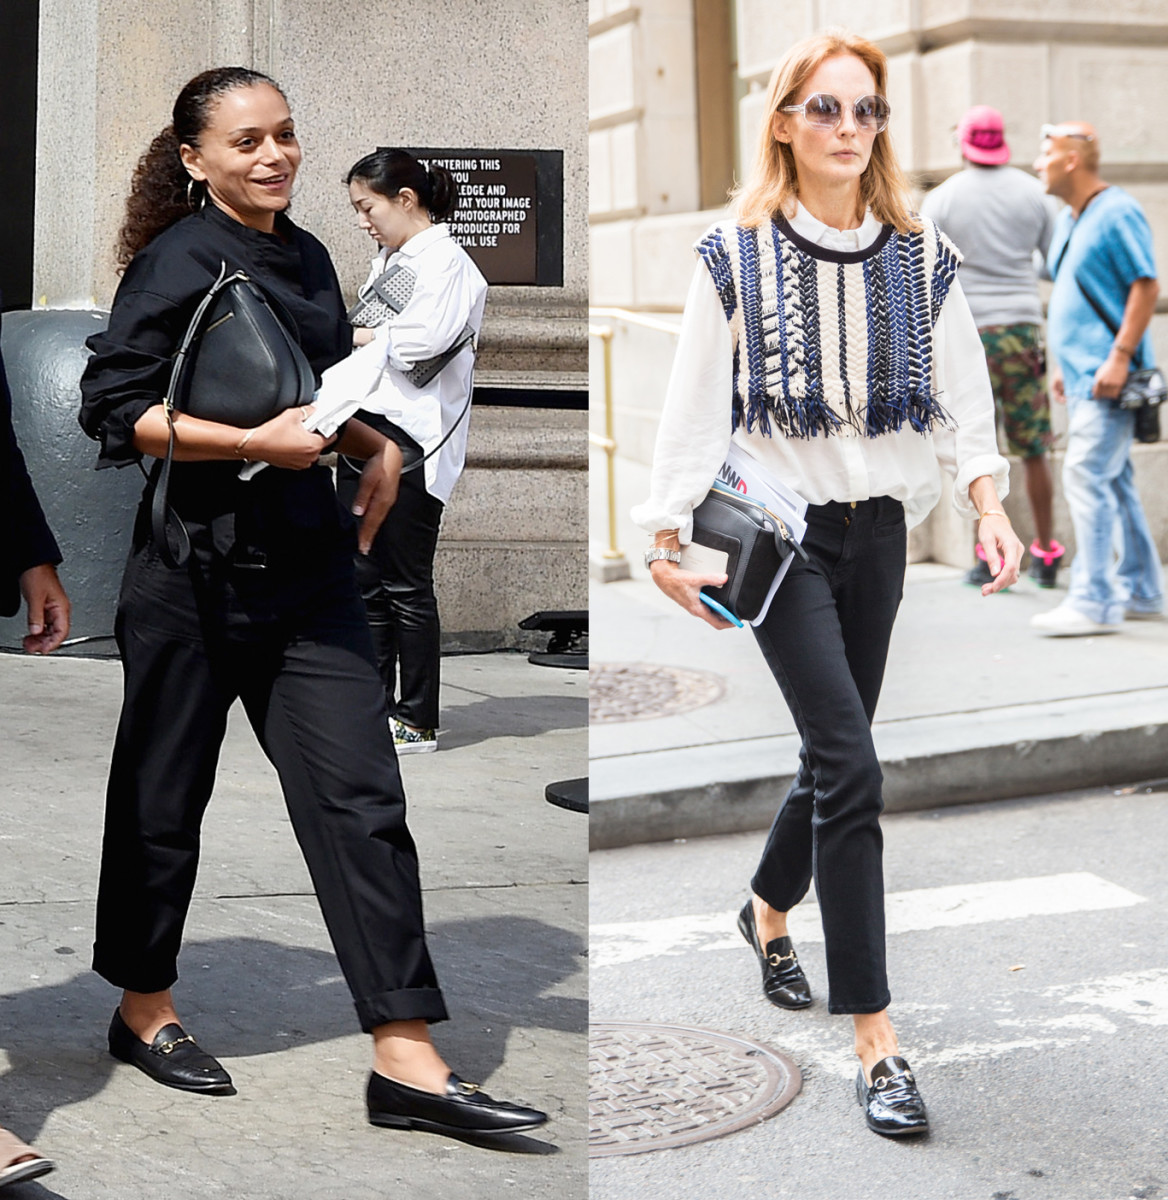 Spotted on the street on Sunday. Photos: Bryan Bedder/Getty Images (left) and KDV/Fashionista (right)